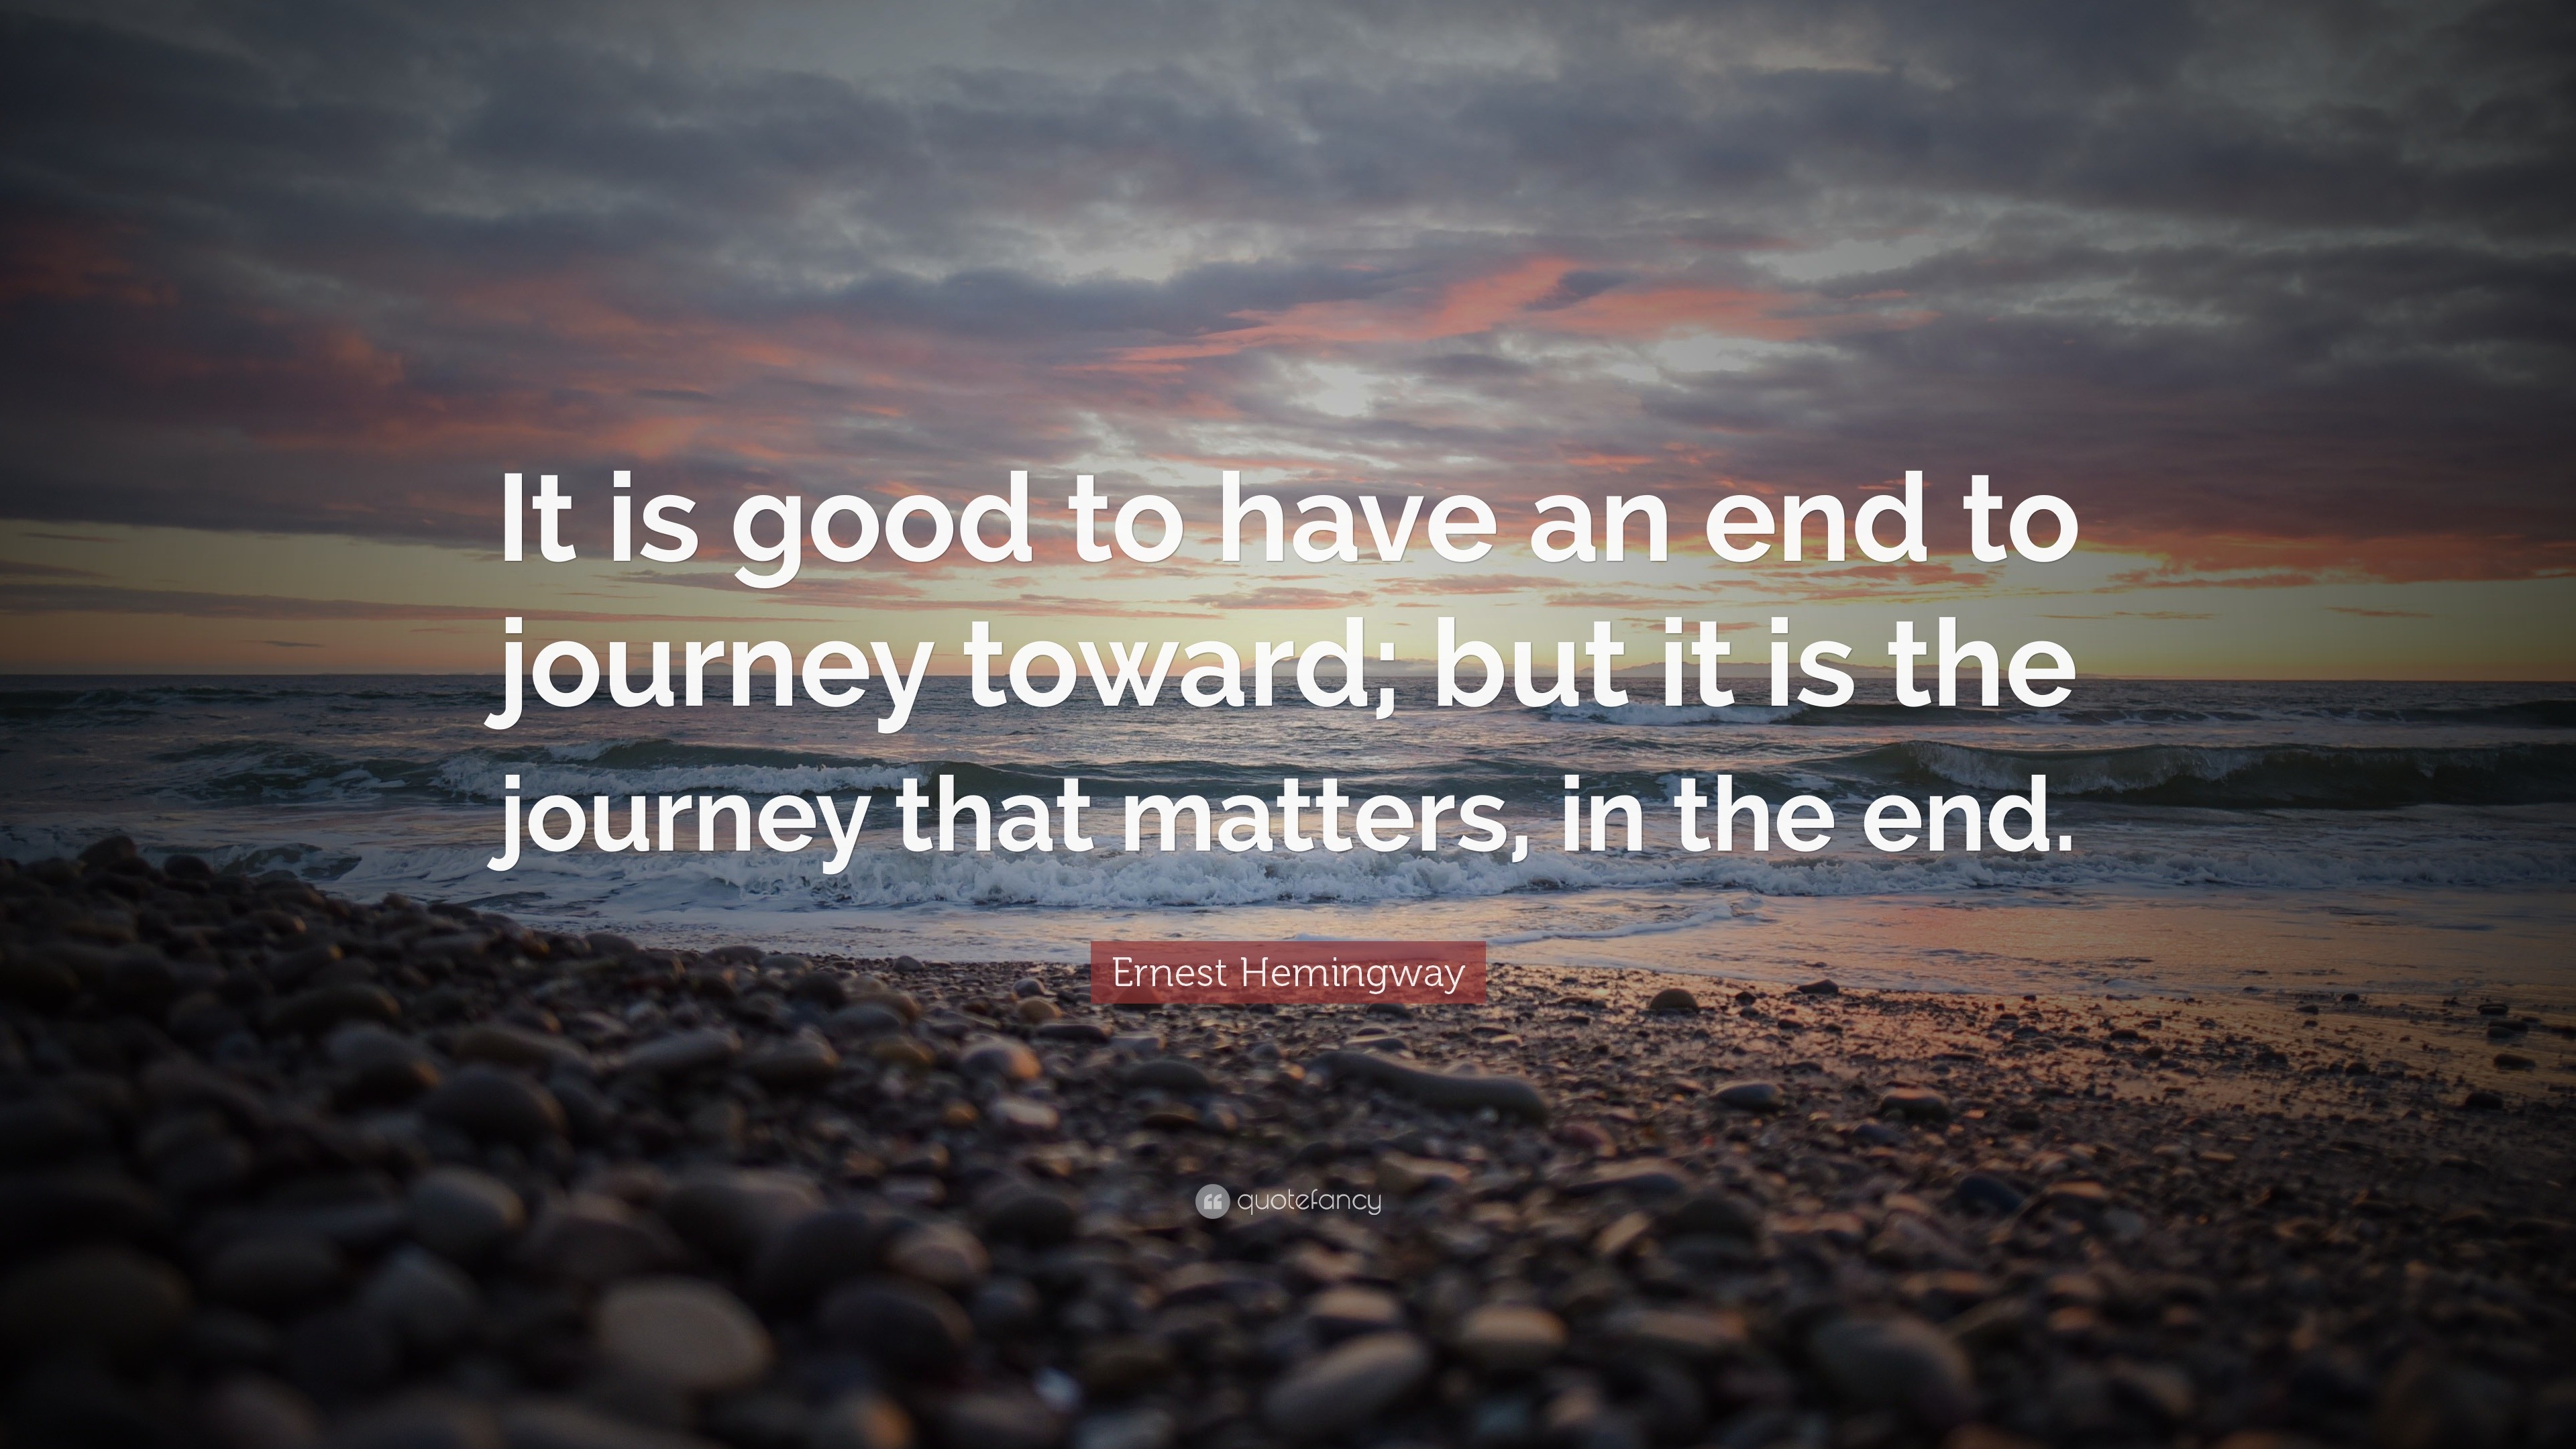 25950 Ernest Hemingway Quote It is good to have an end to journey toward